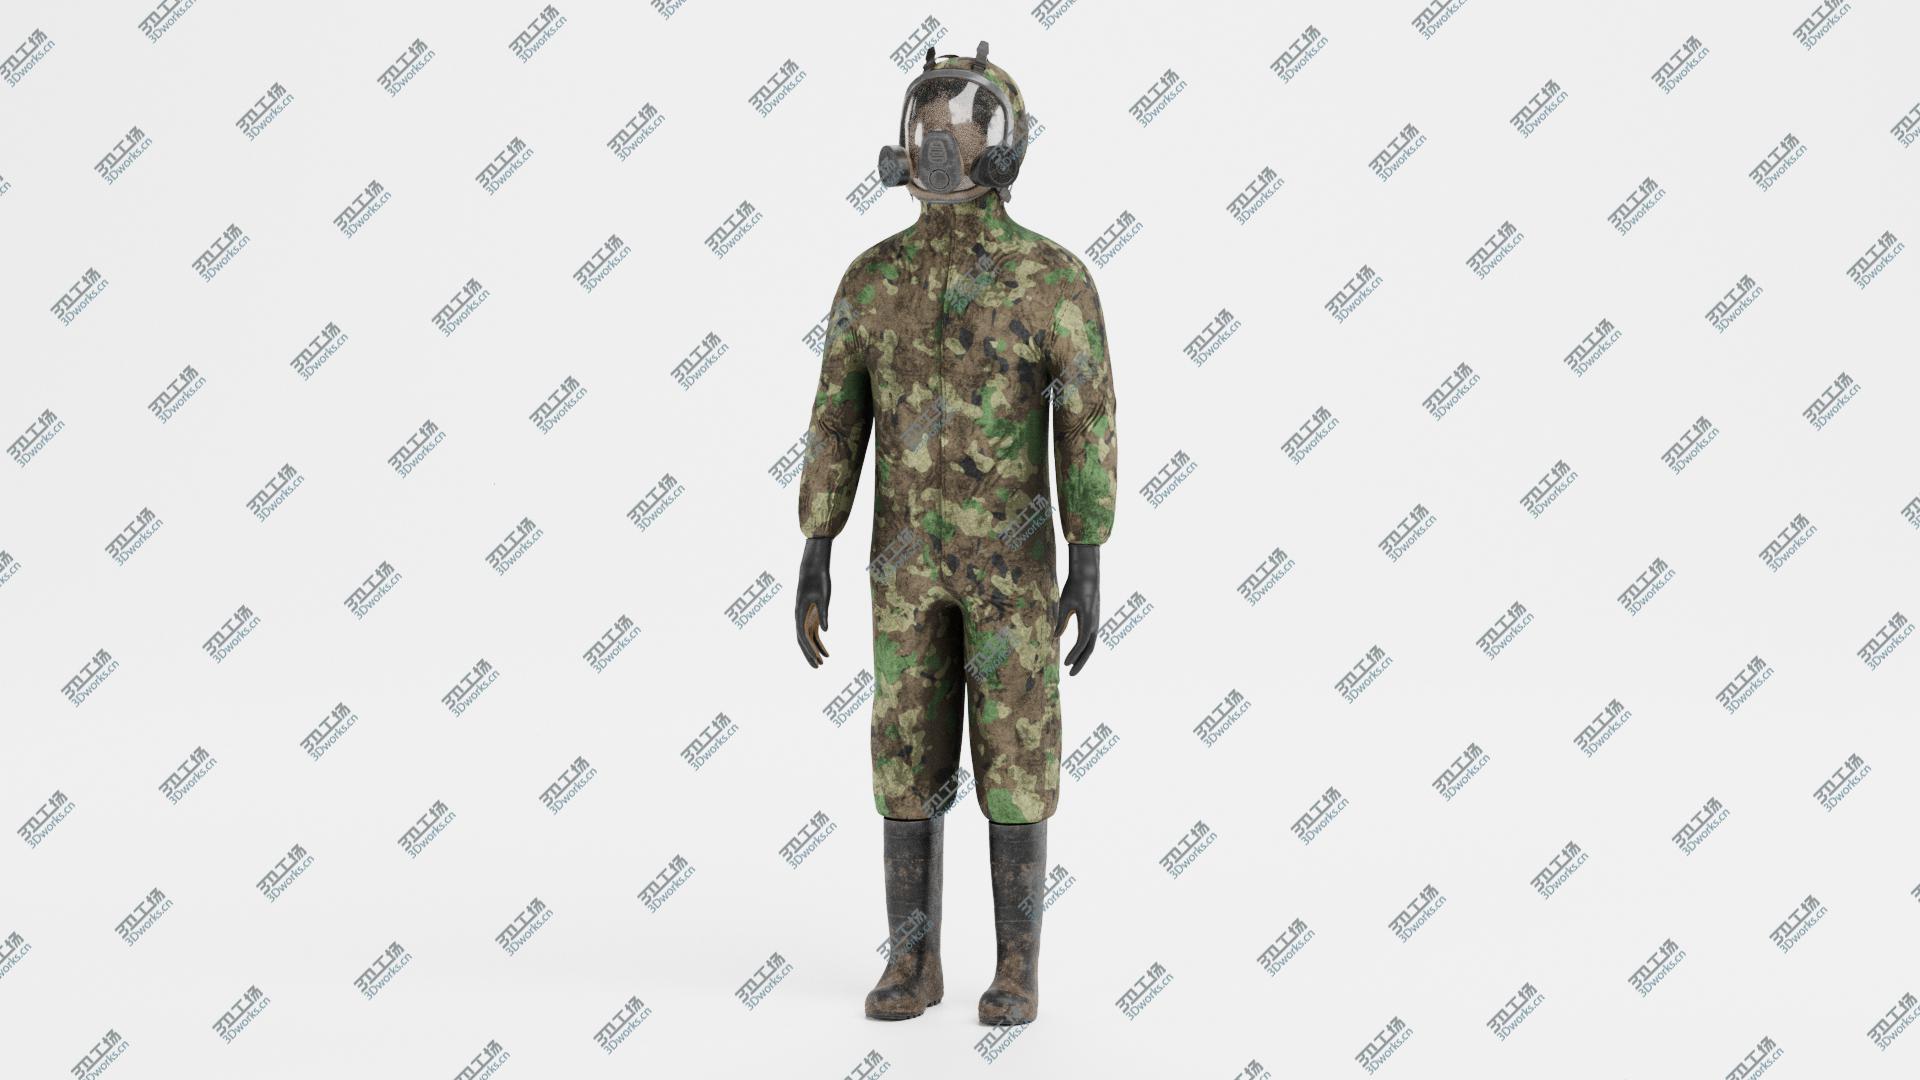 images/goods_img/202104093/Protective Suit 4 3D model/1.jpg